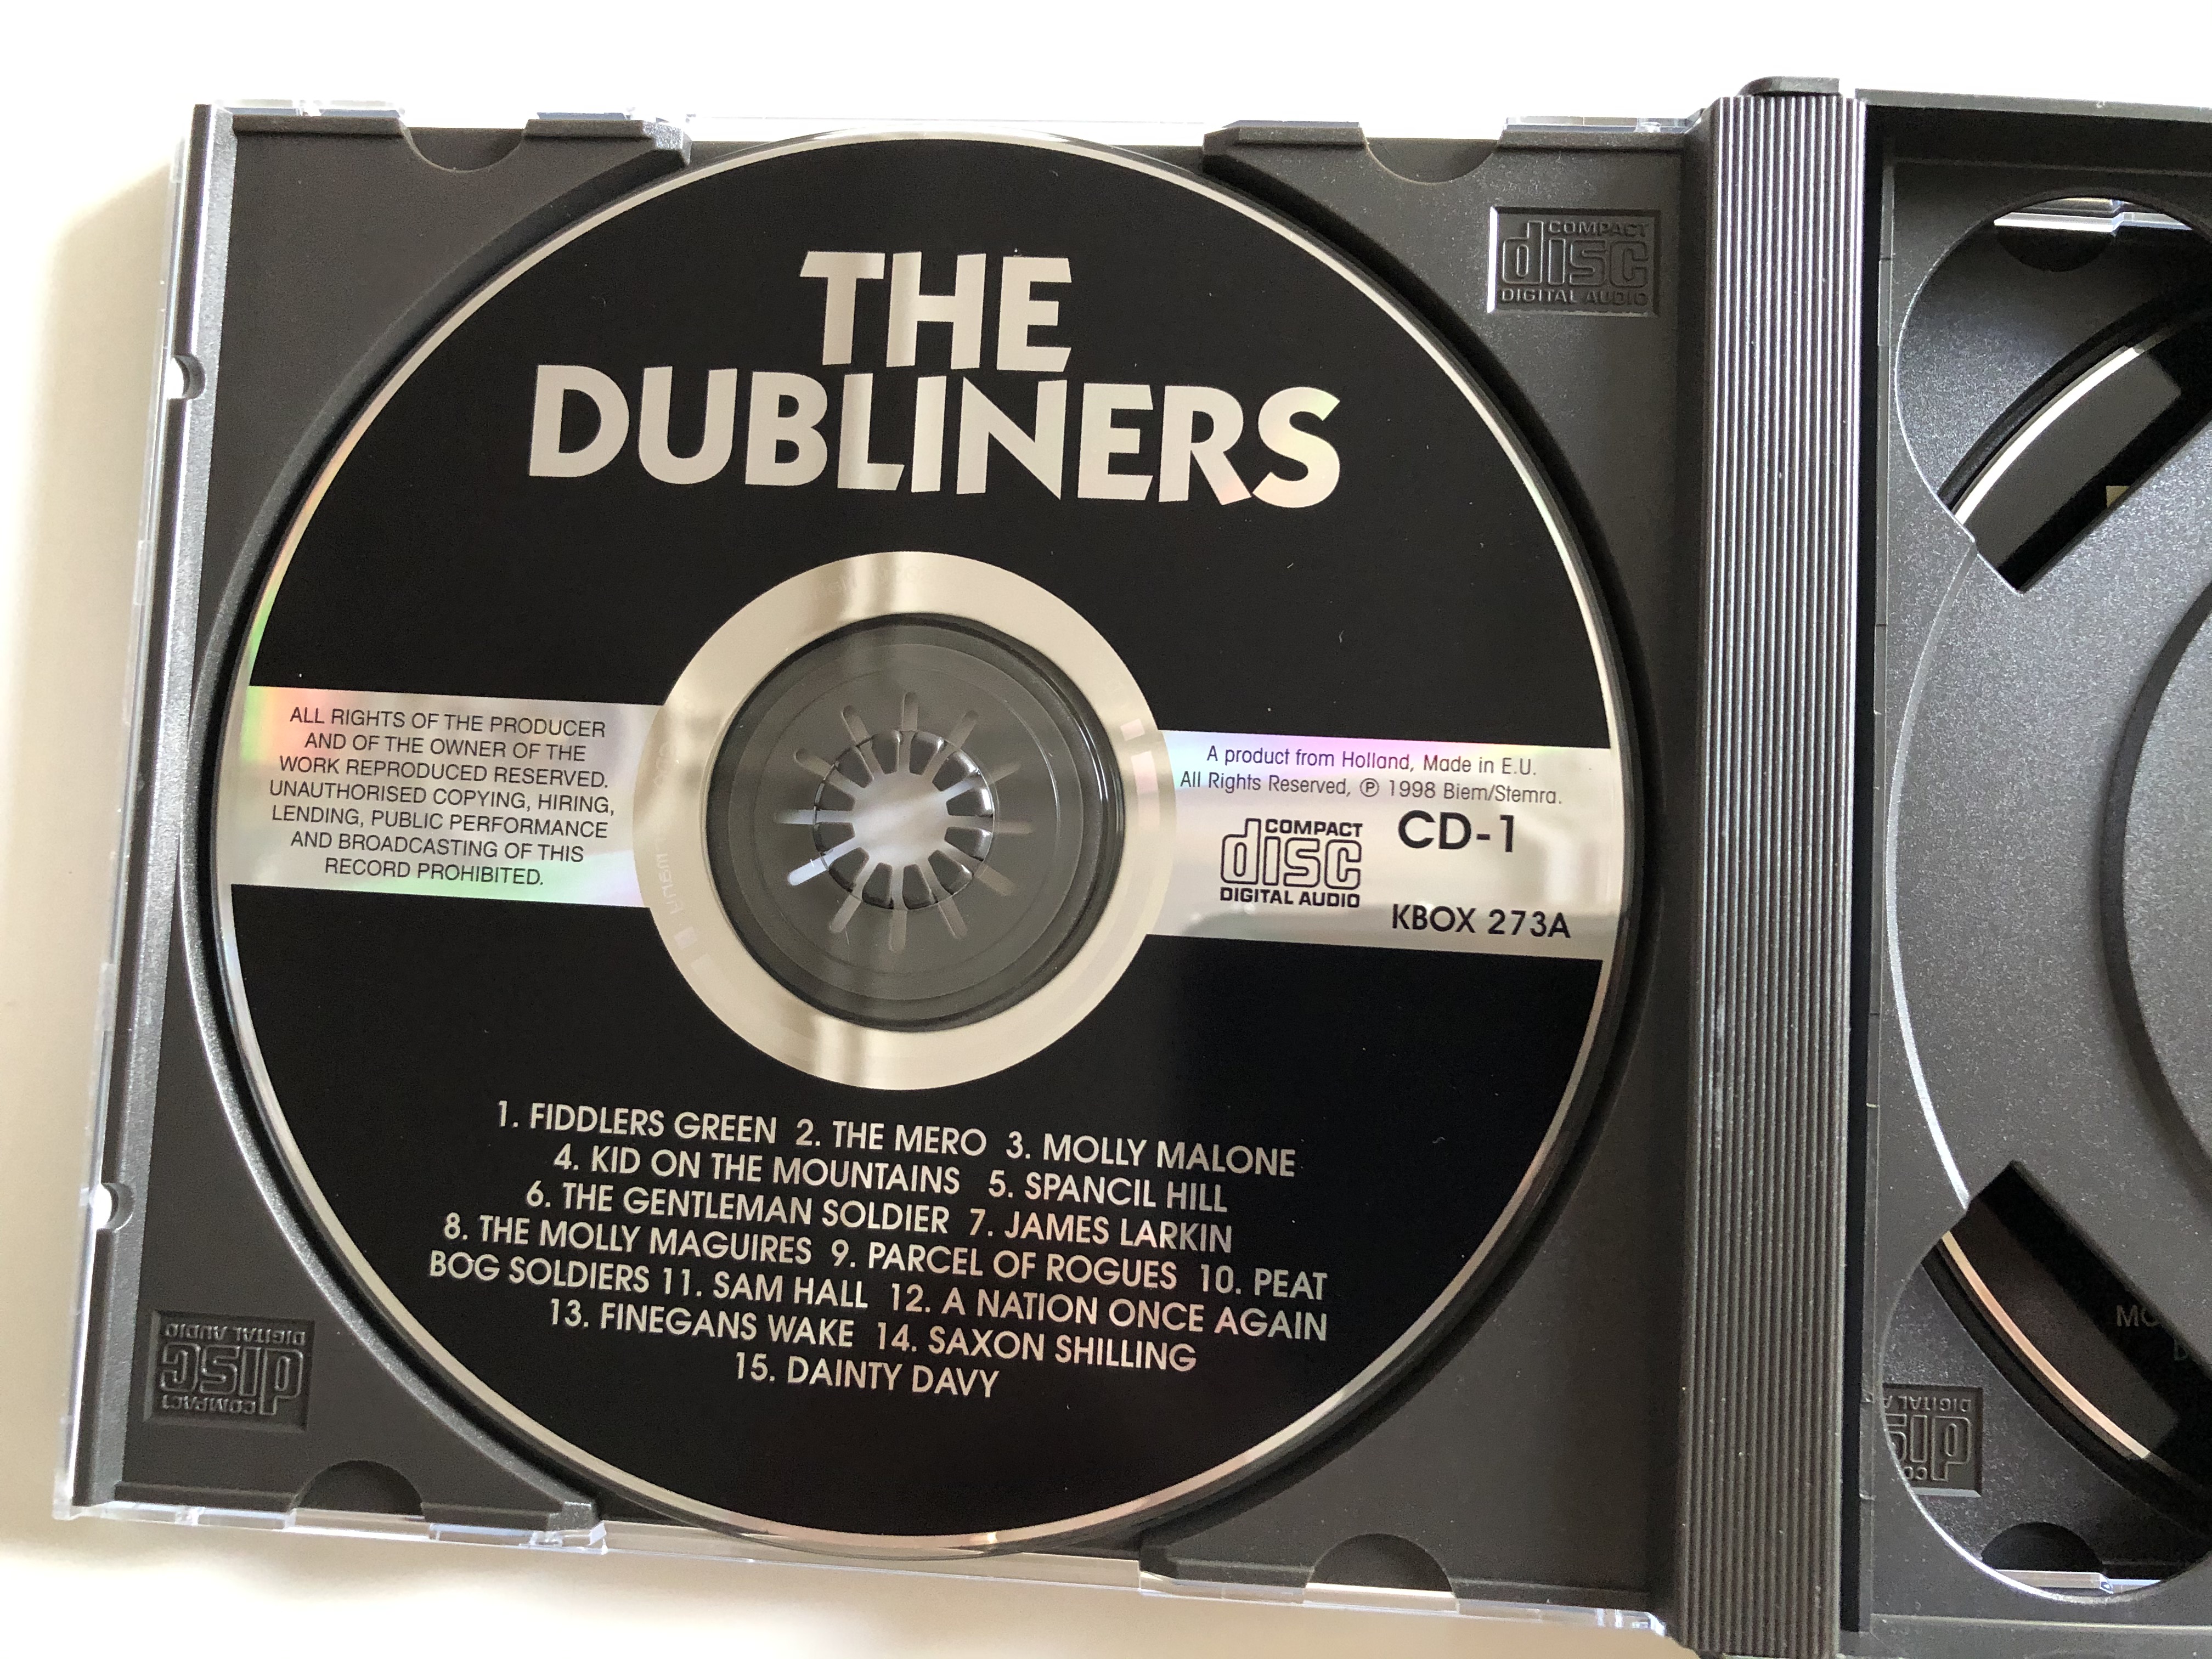 the-dubliners-hey-yohnny-mcgorry-a-nation-once-again-free-the-people-the-wild-rover-spancil-hill-weton-wesgram-2x-audio-cd-1998-kbox-273-2-.jpg